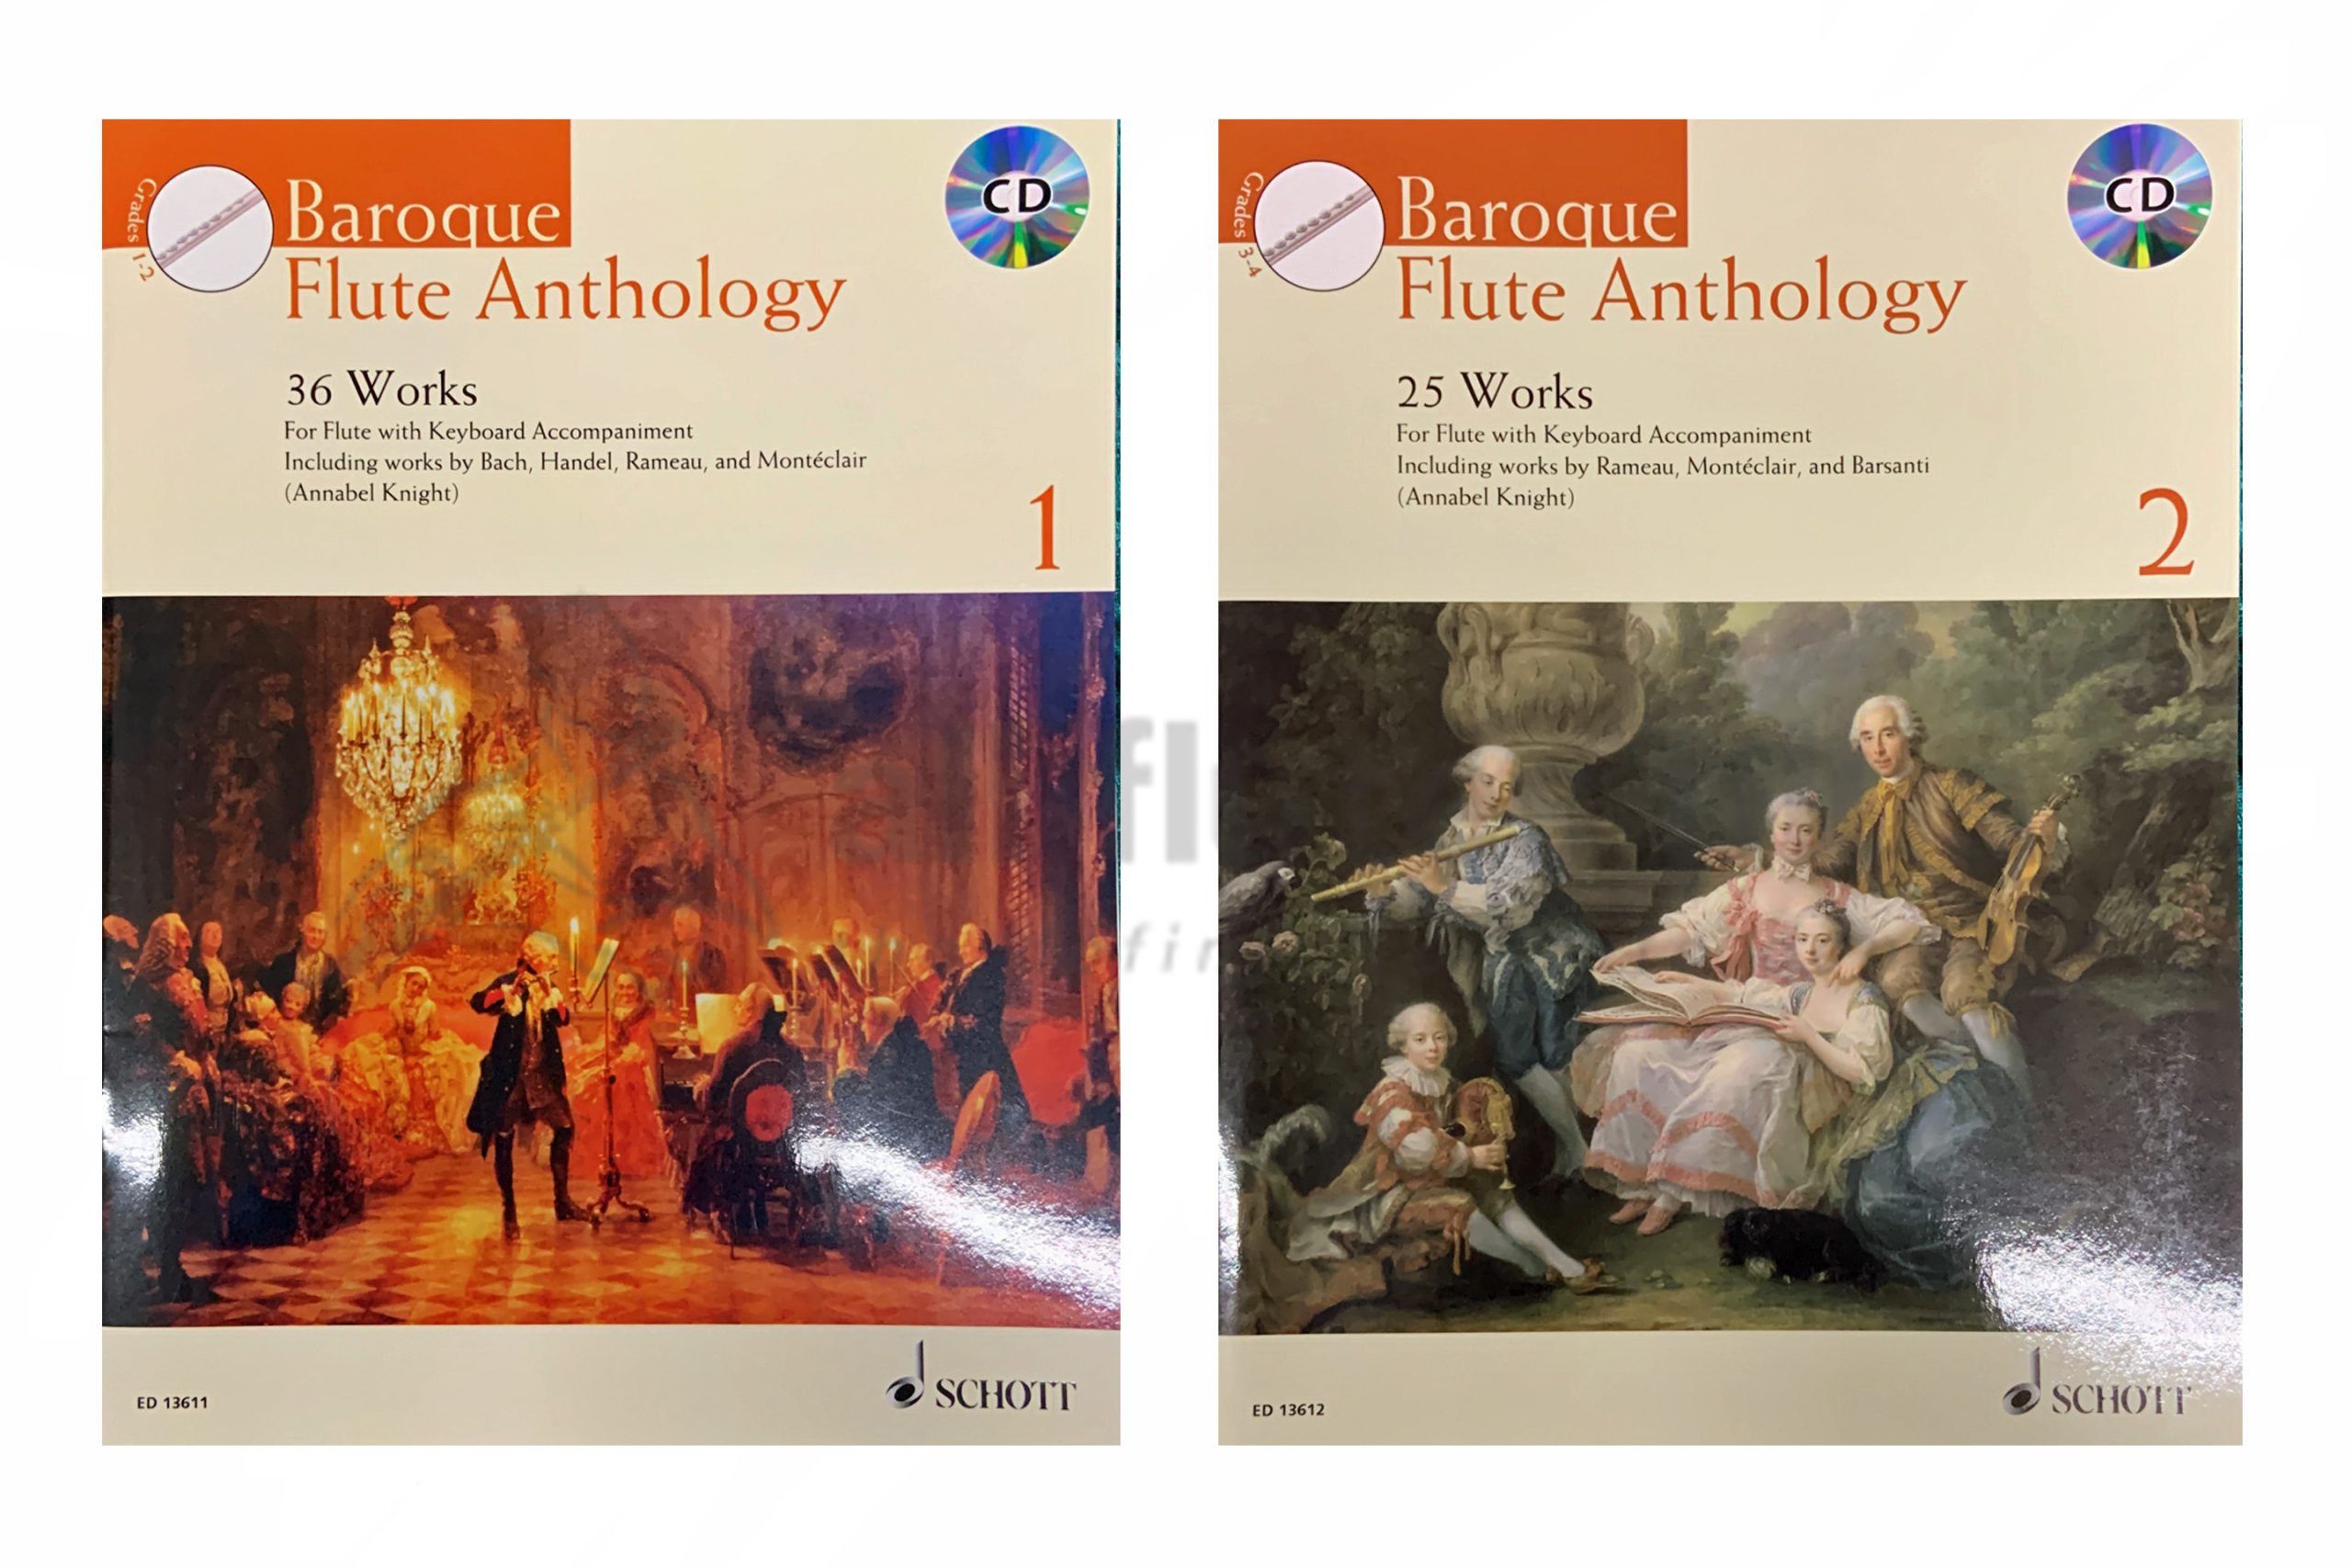 Baroque Flute Anthology with CD